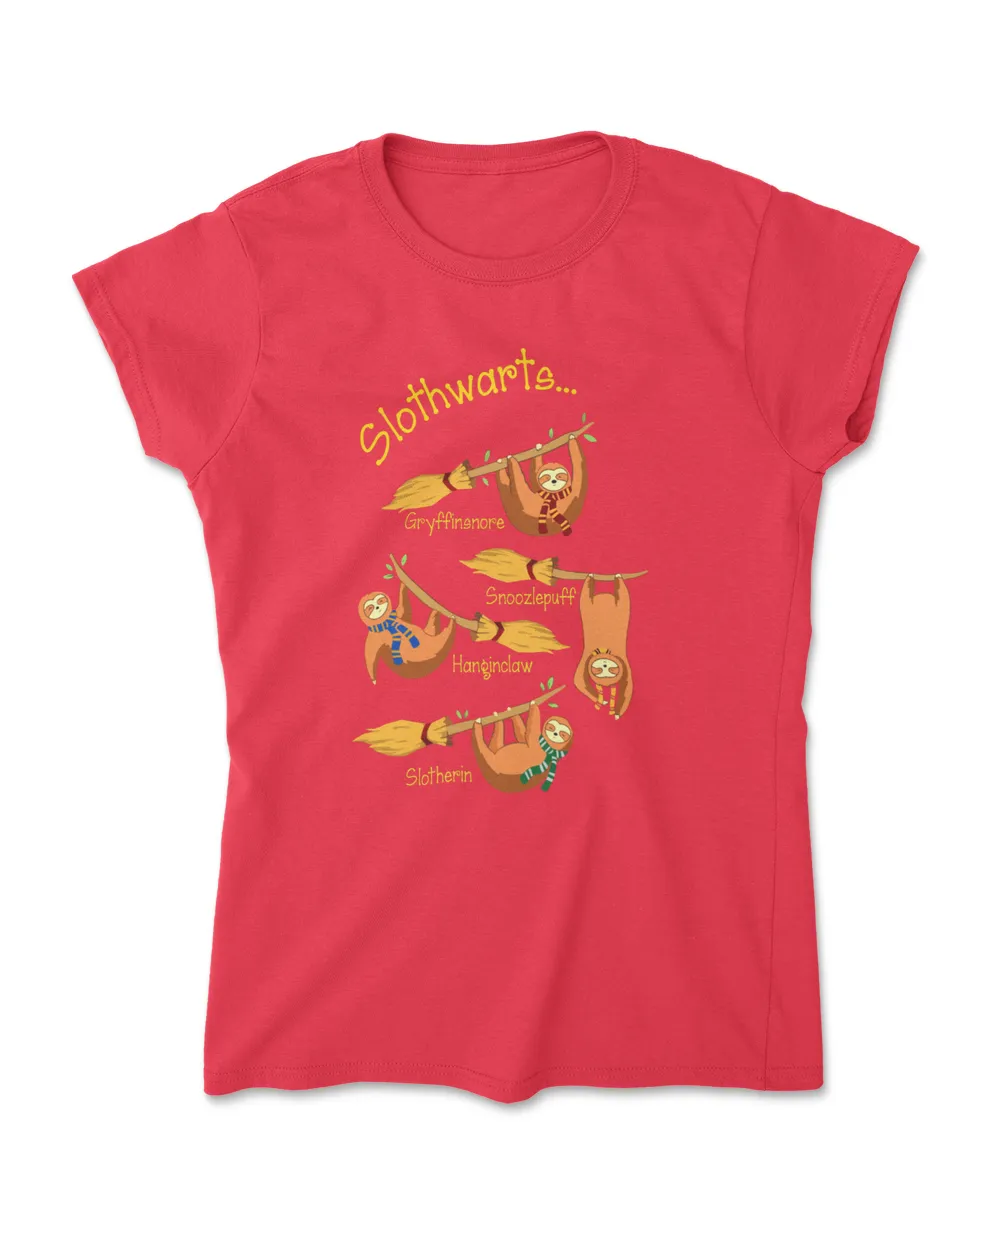 Funny Slothwarts Gryffinsnore Snoozlepuff Hangiclaw Slotherin